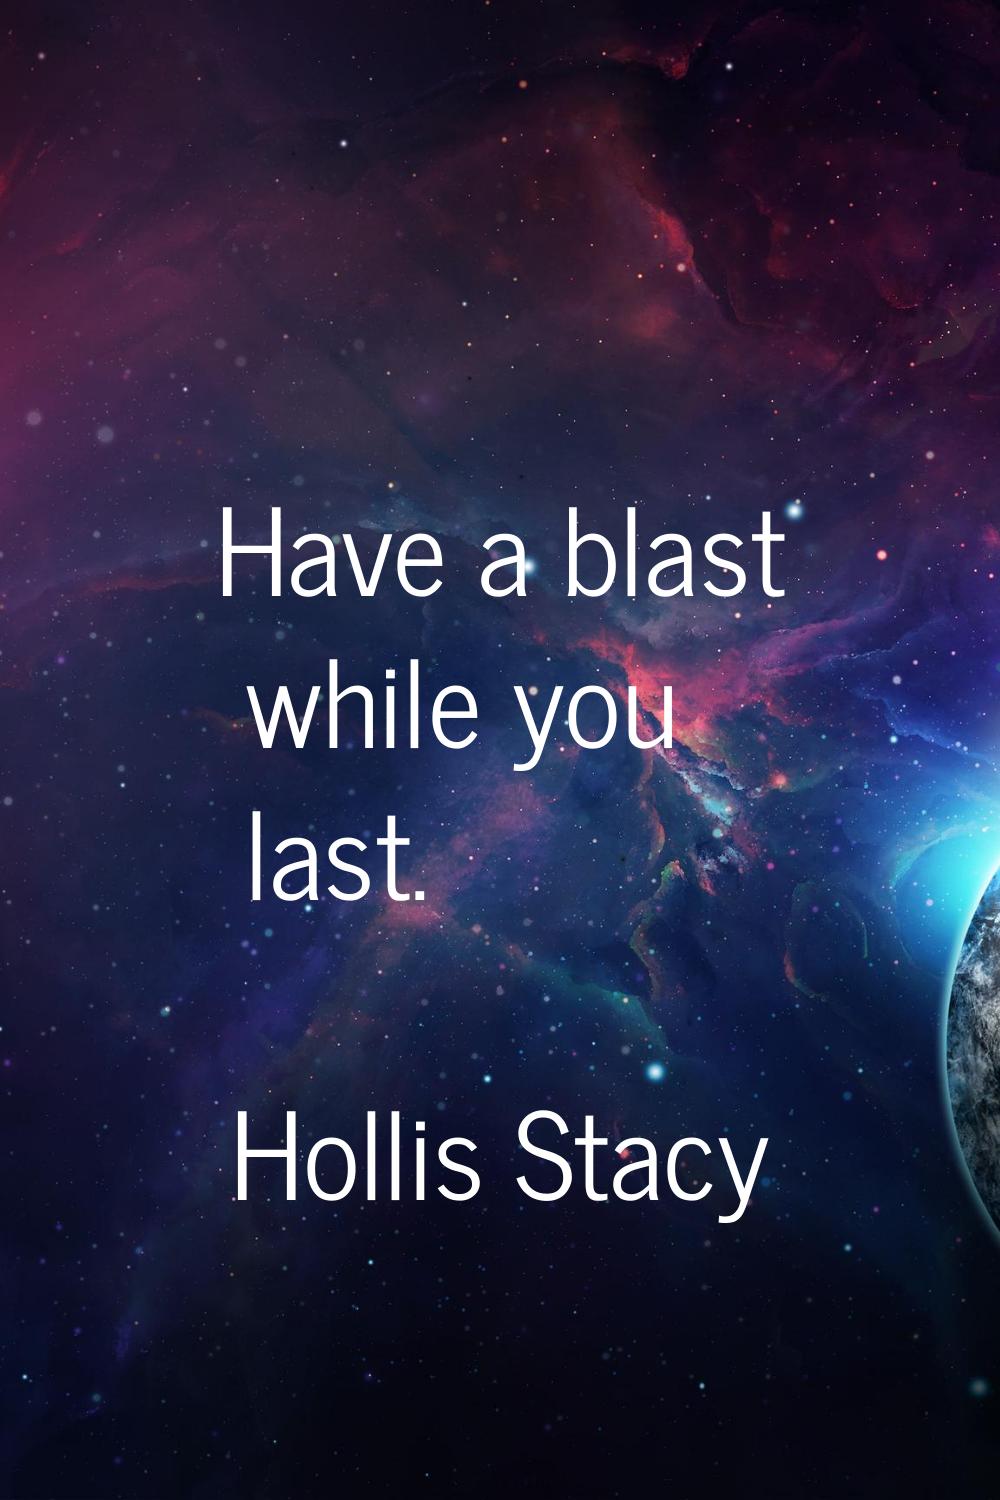 Have a blast while you last.